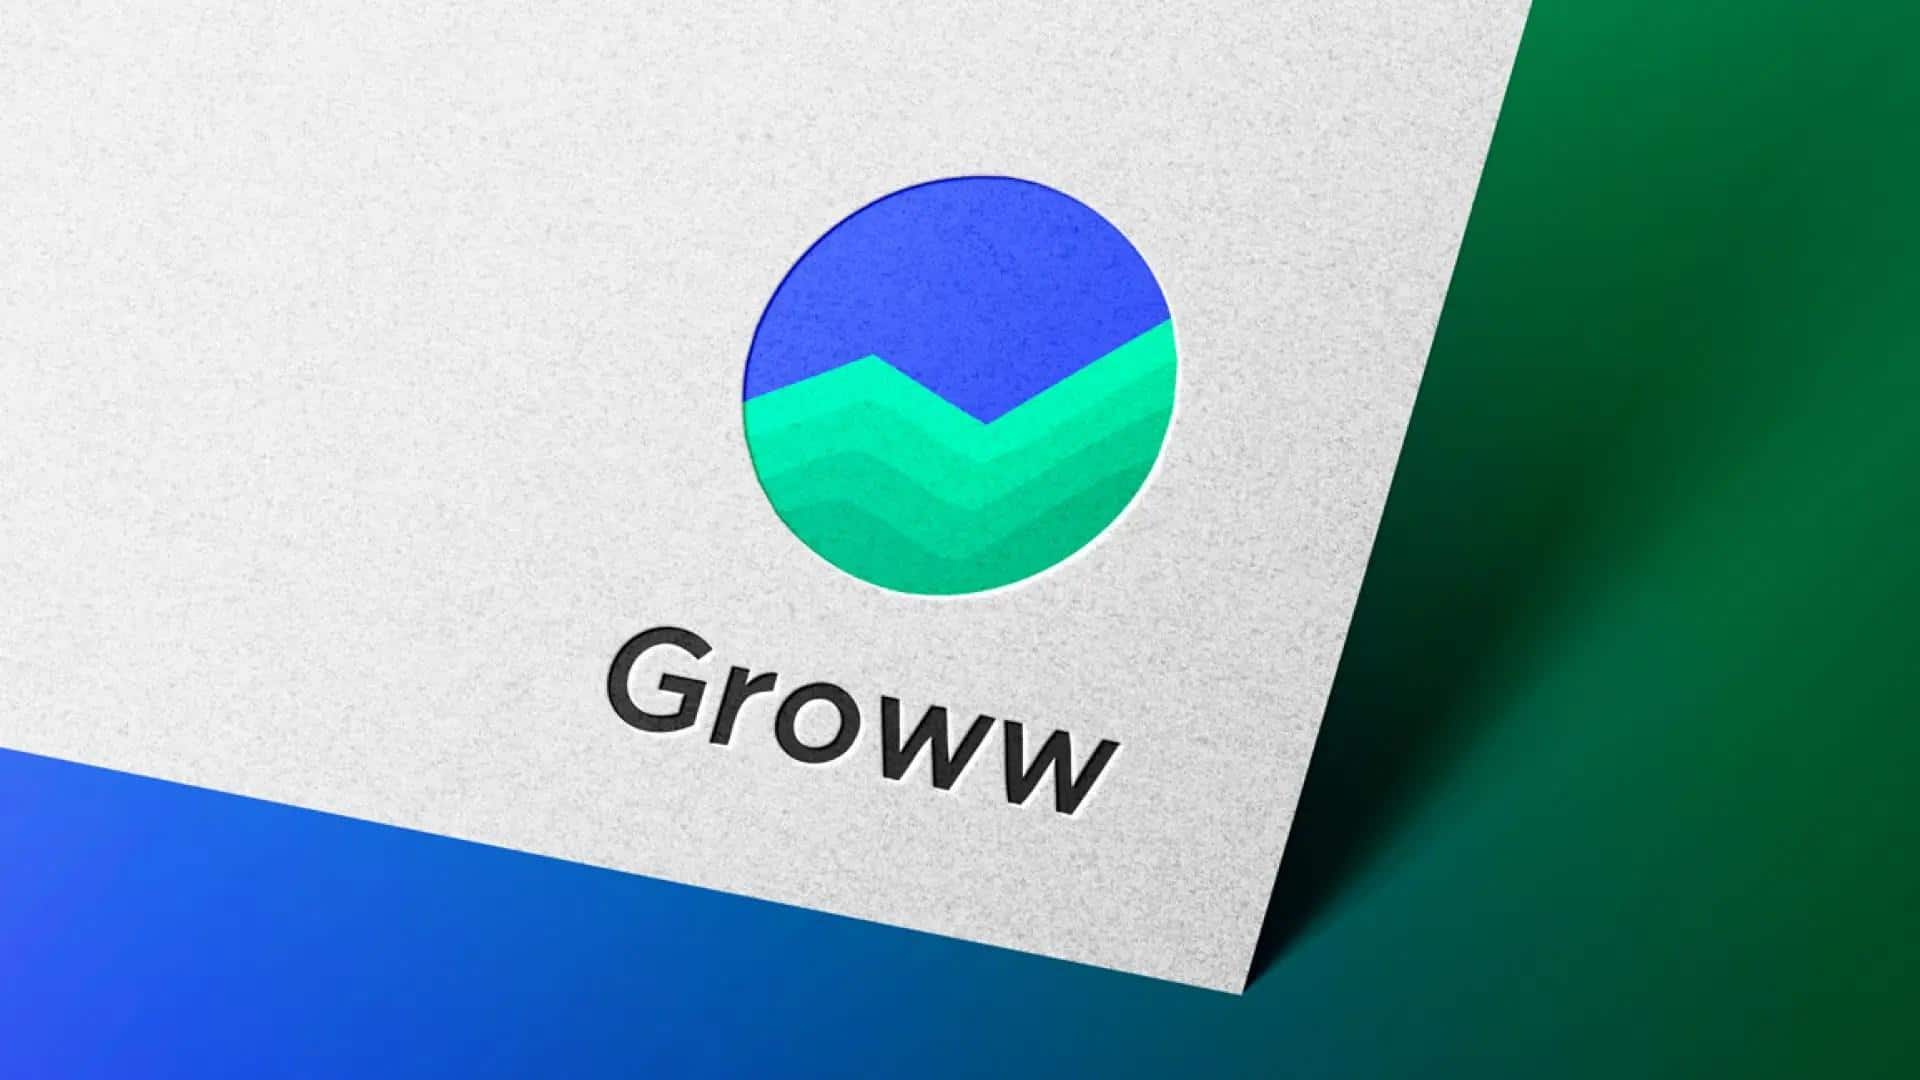 Groww app down during market hours, users demand compensation